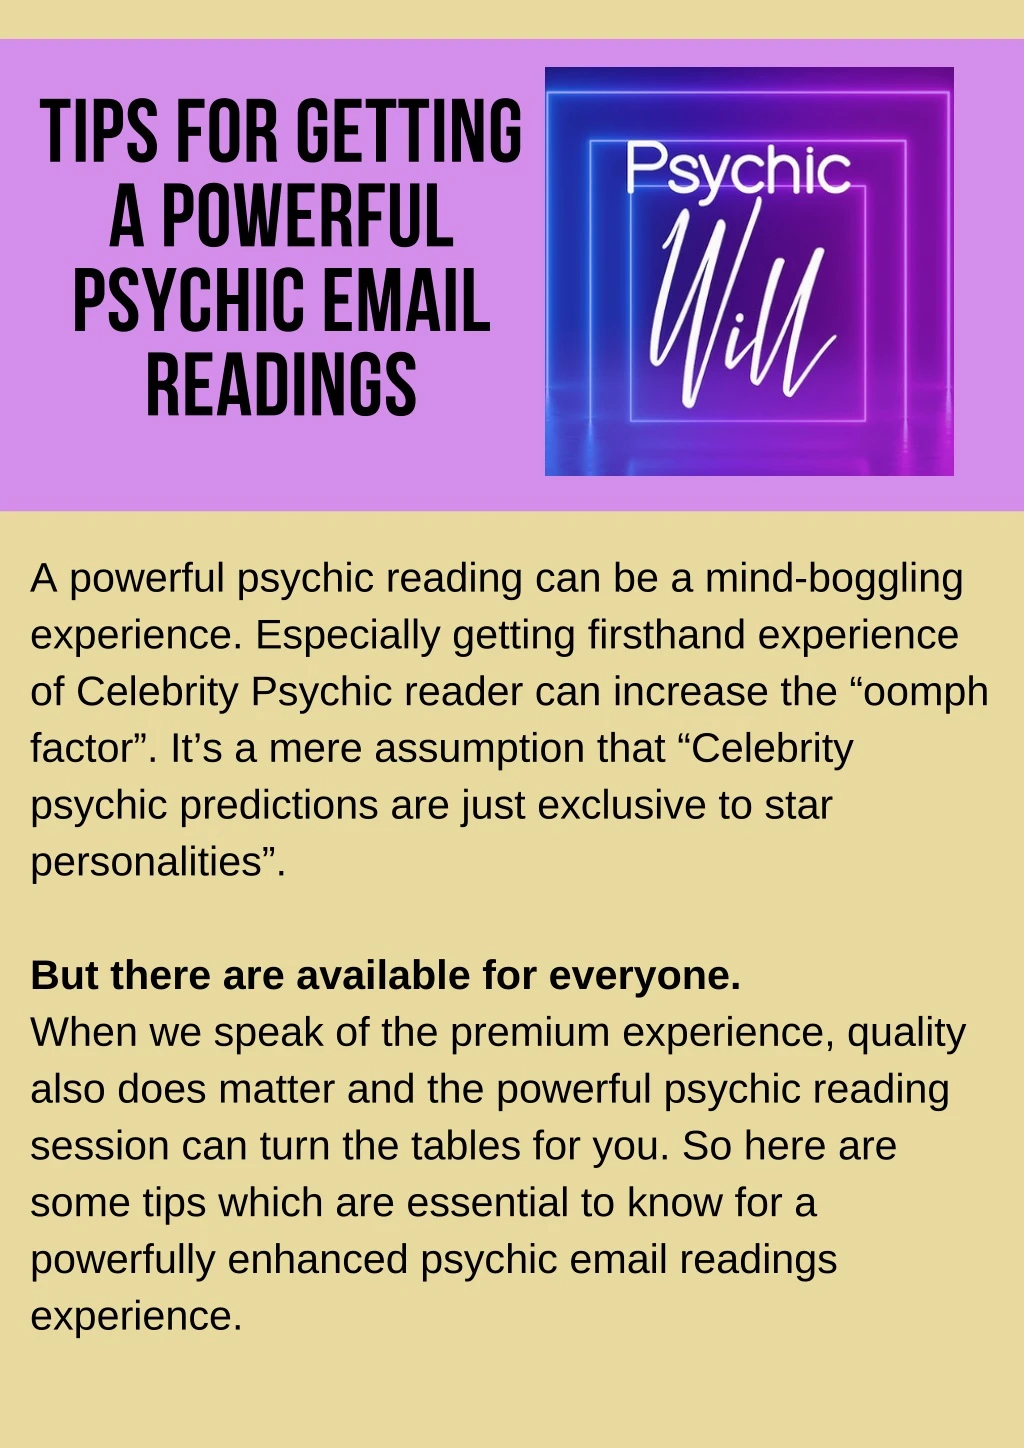 tips for getting a powerful psychic email readings